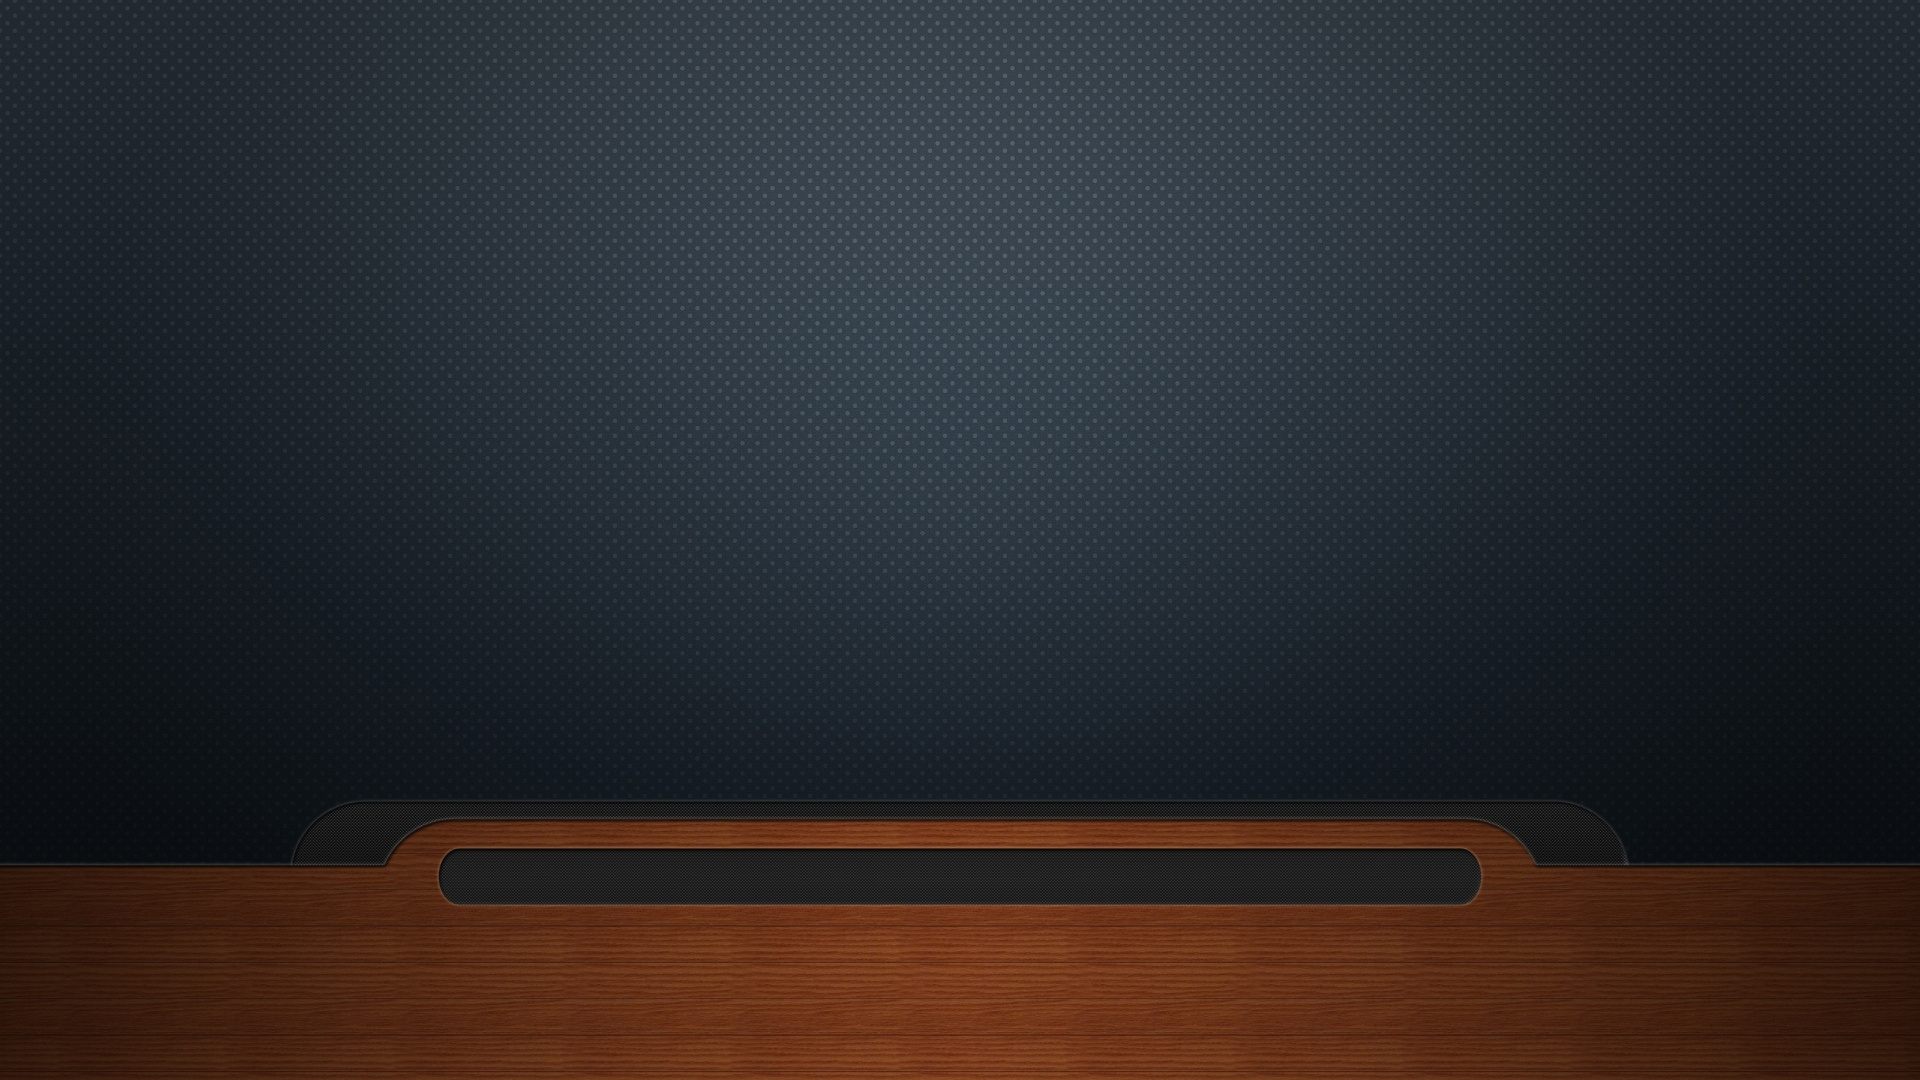 Black and Brown Wooden Board. Wallpaper in 1920x1080 Resolution